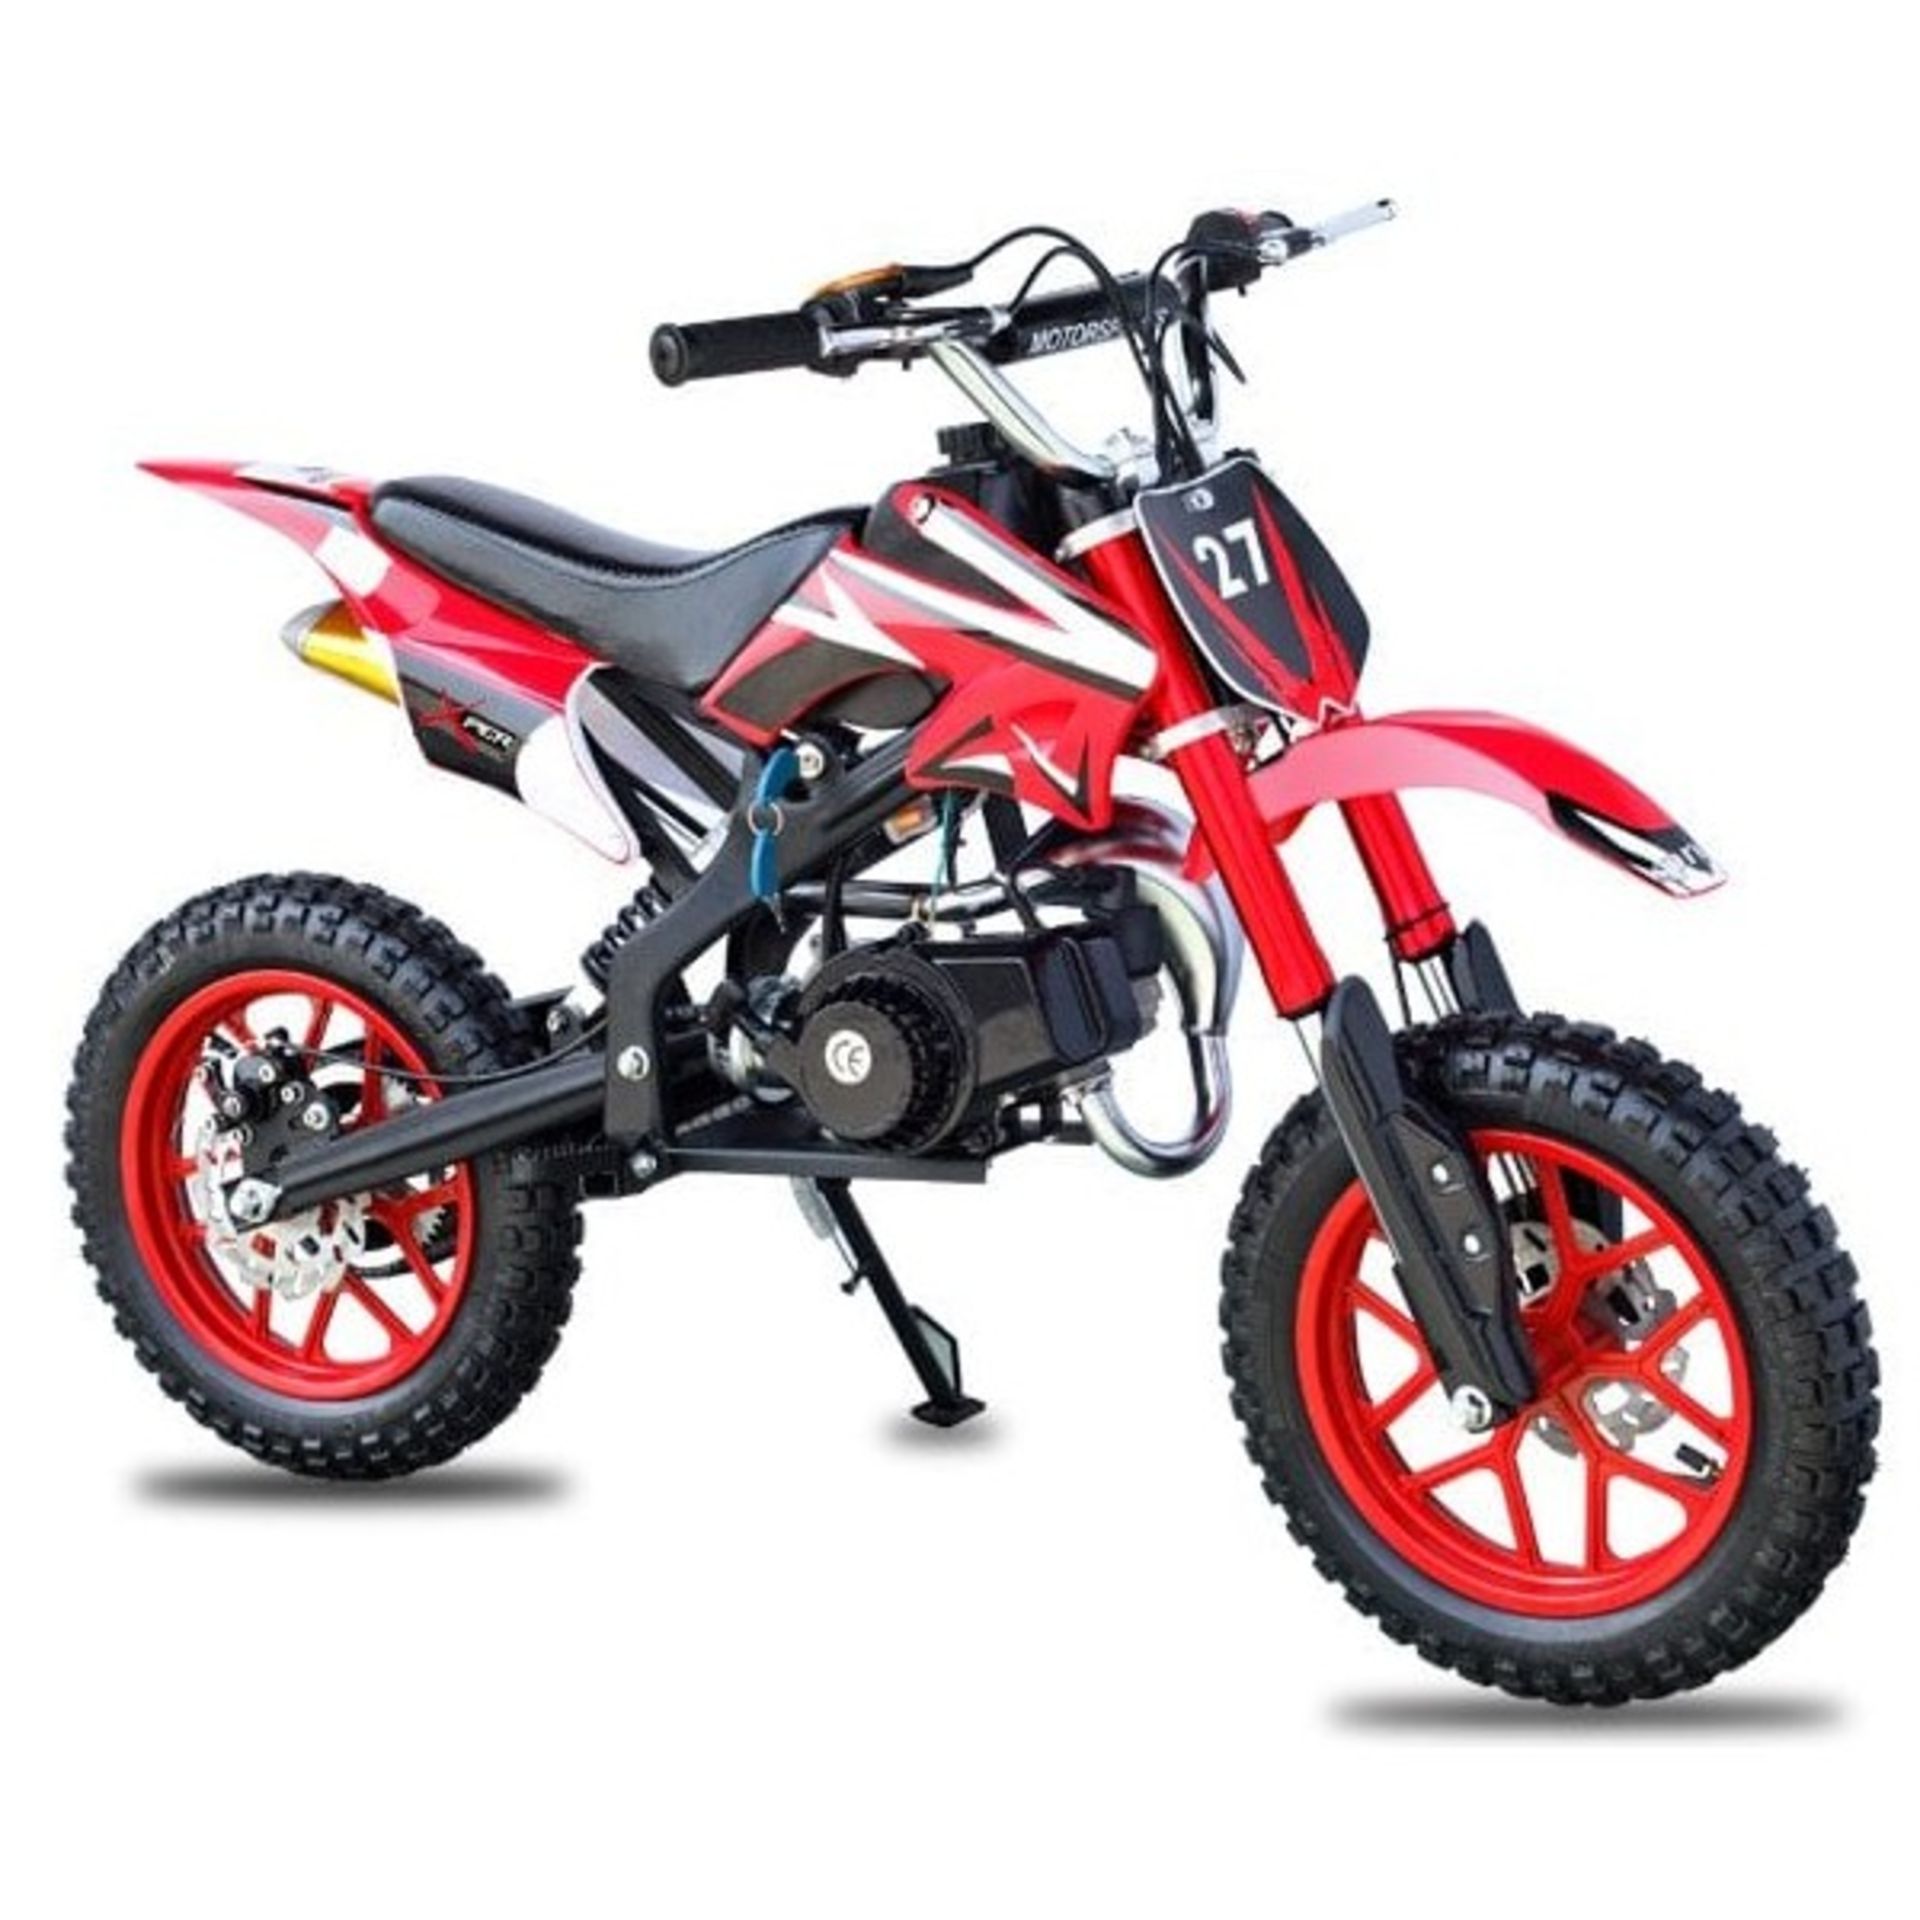 V Brand New 50cc Delta Mini Bike - Colour May Vary - Two Stroke - Single Cylinder - Image 2 of 3